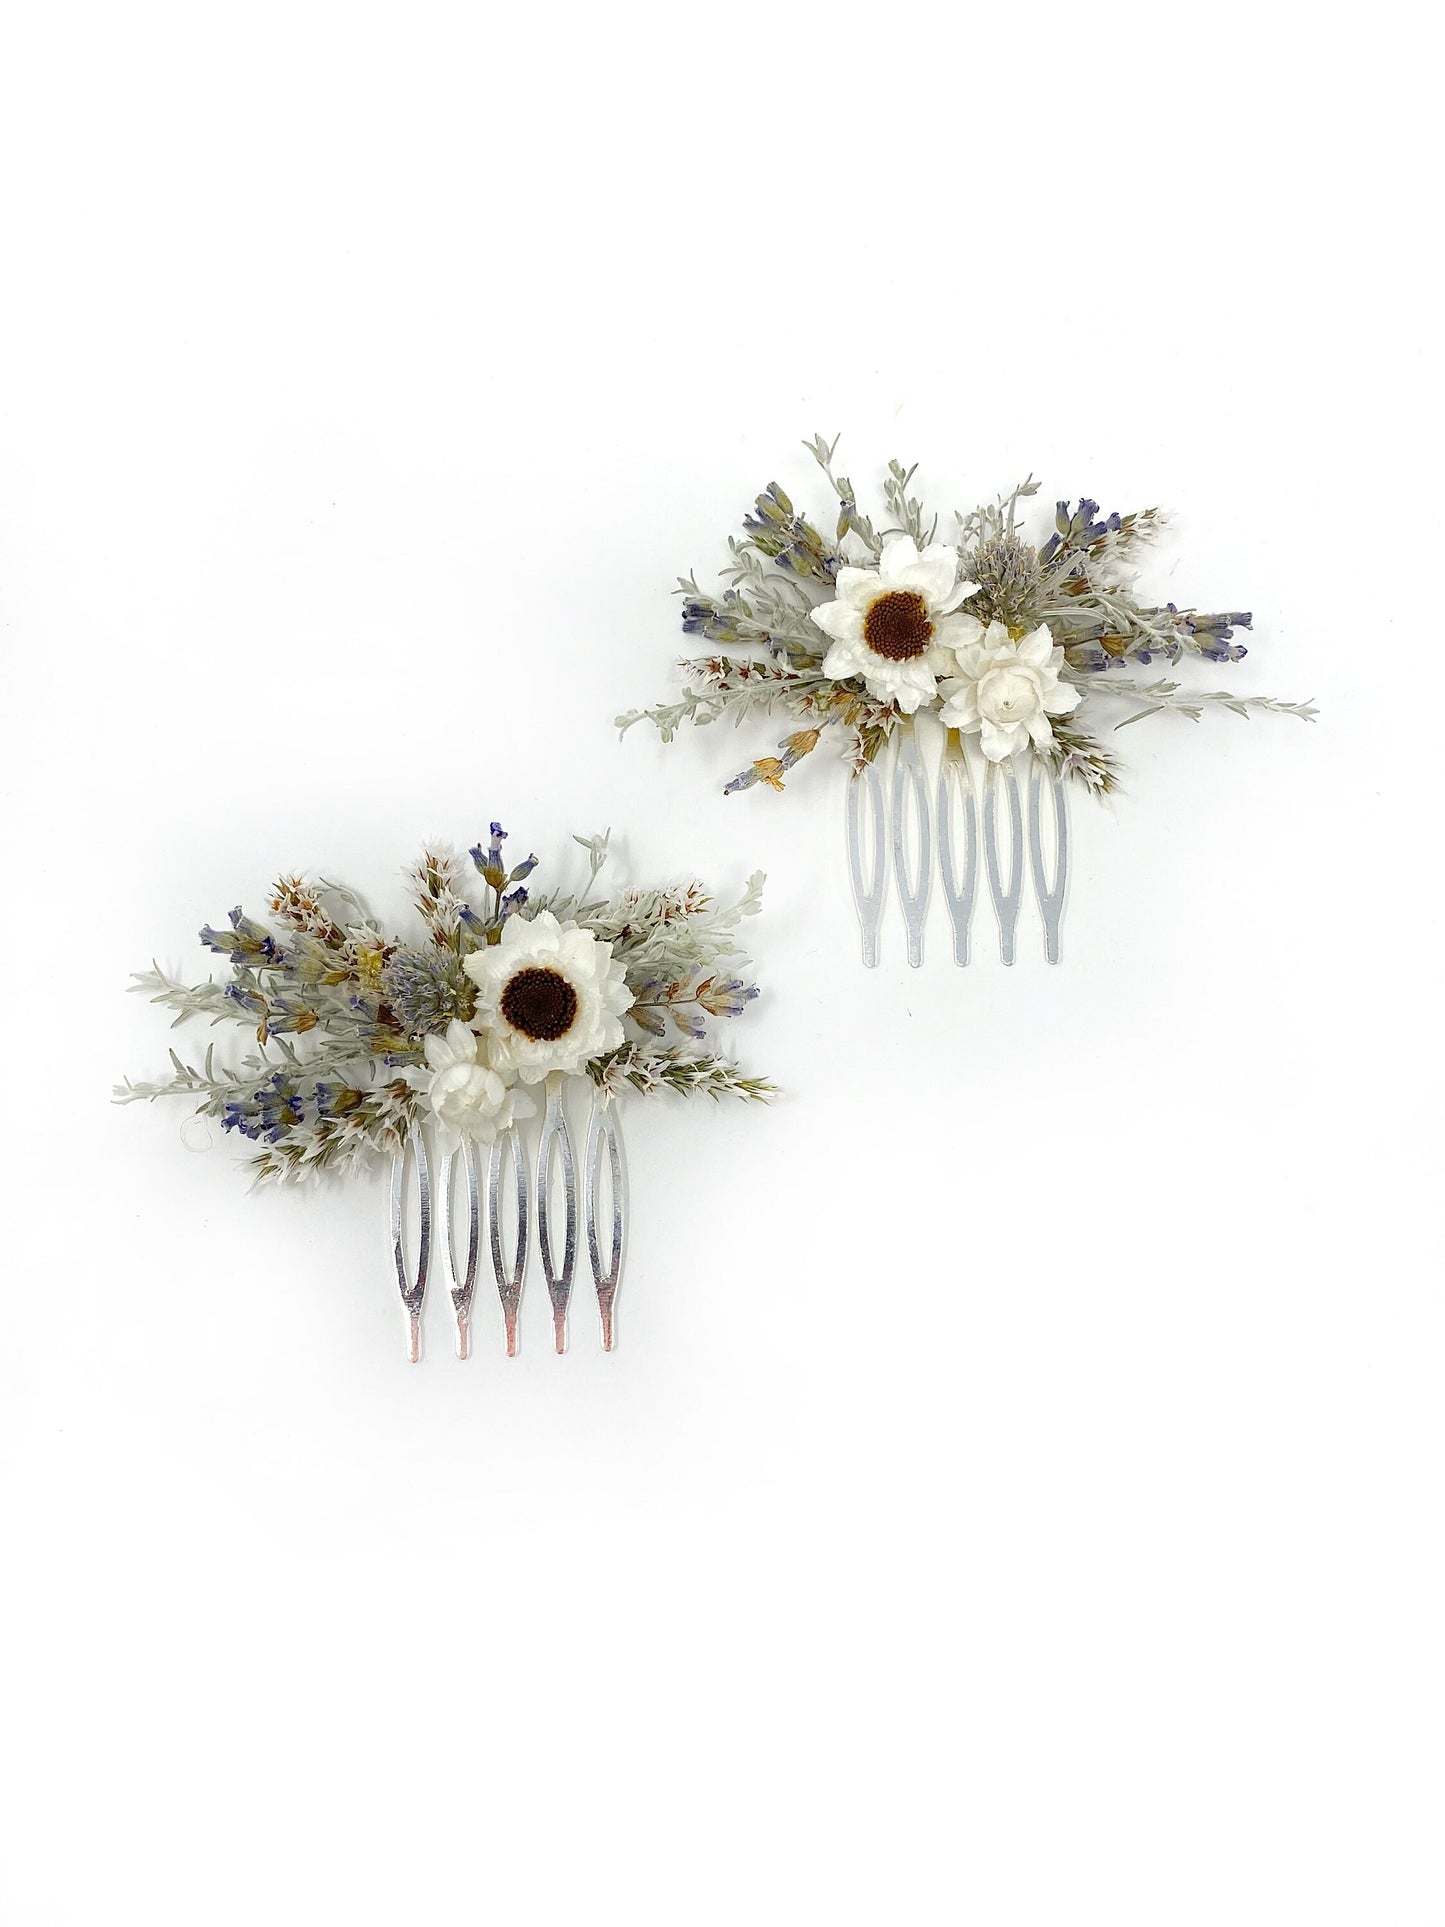 Hair Comb, Hair Pins, Dried flowers, Preserved, Floral Comb, Clip, Wedding, Corsage, Prom, Bridal, Blue, Winter, Spring, Natural, White